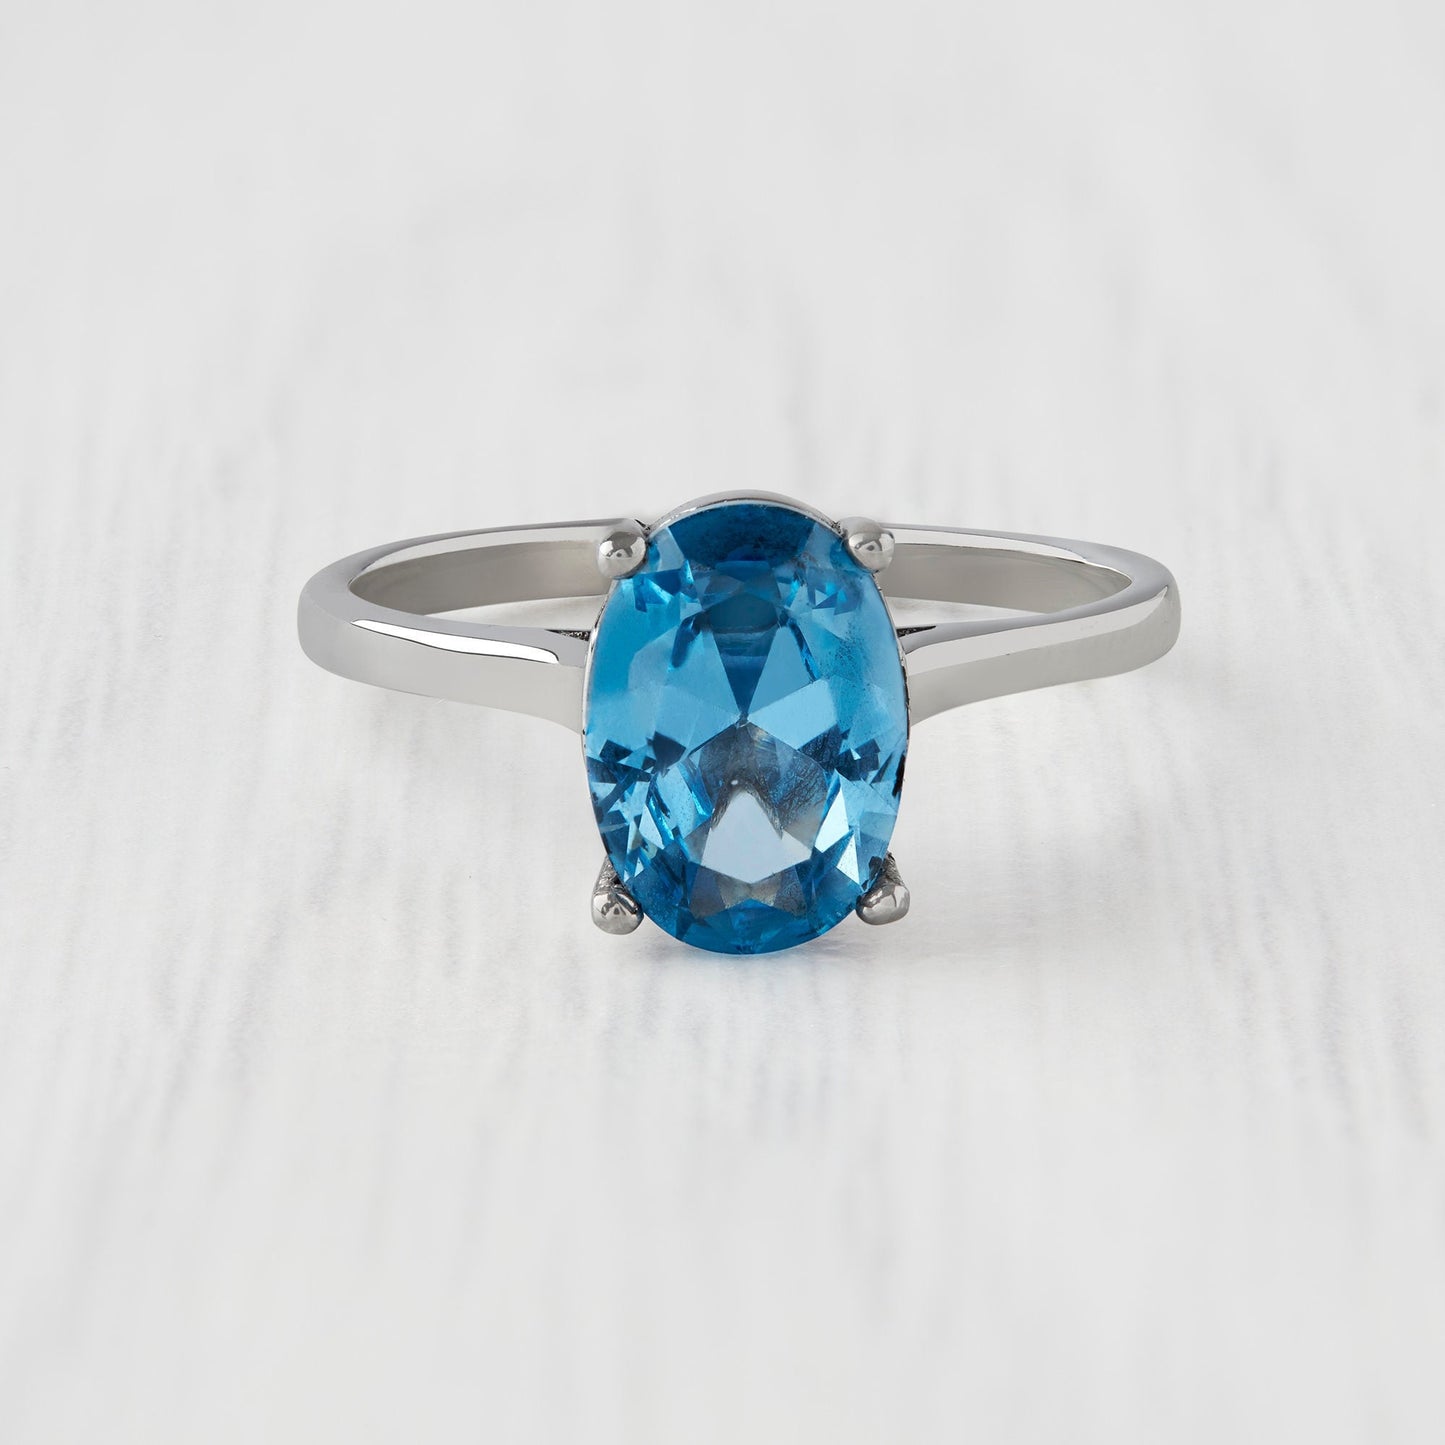 1.7ct Oval Cut natural blue topaz Solitaire cathedral ring in Titanium or White Gold